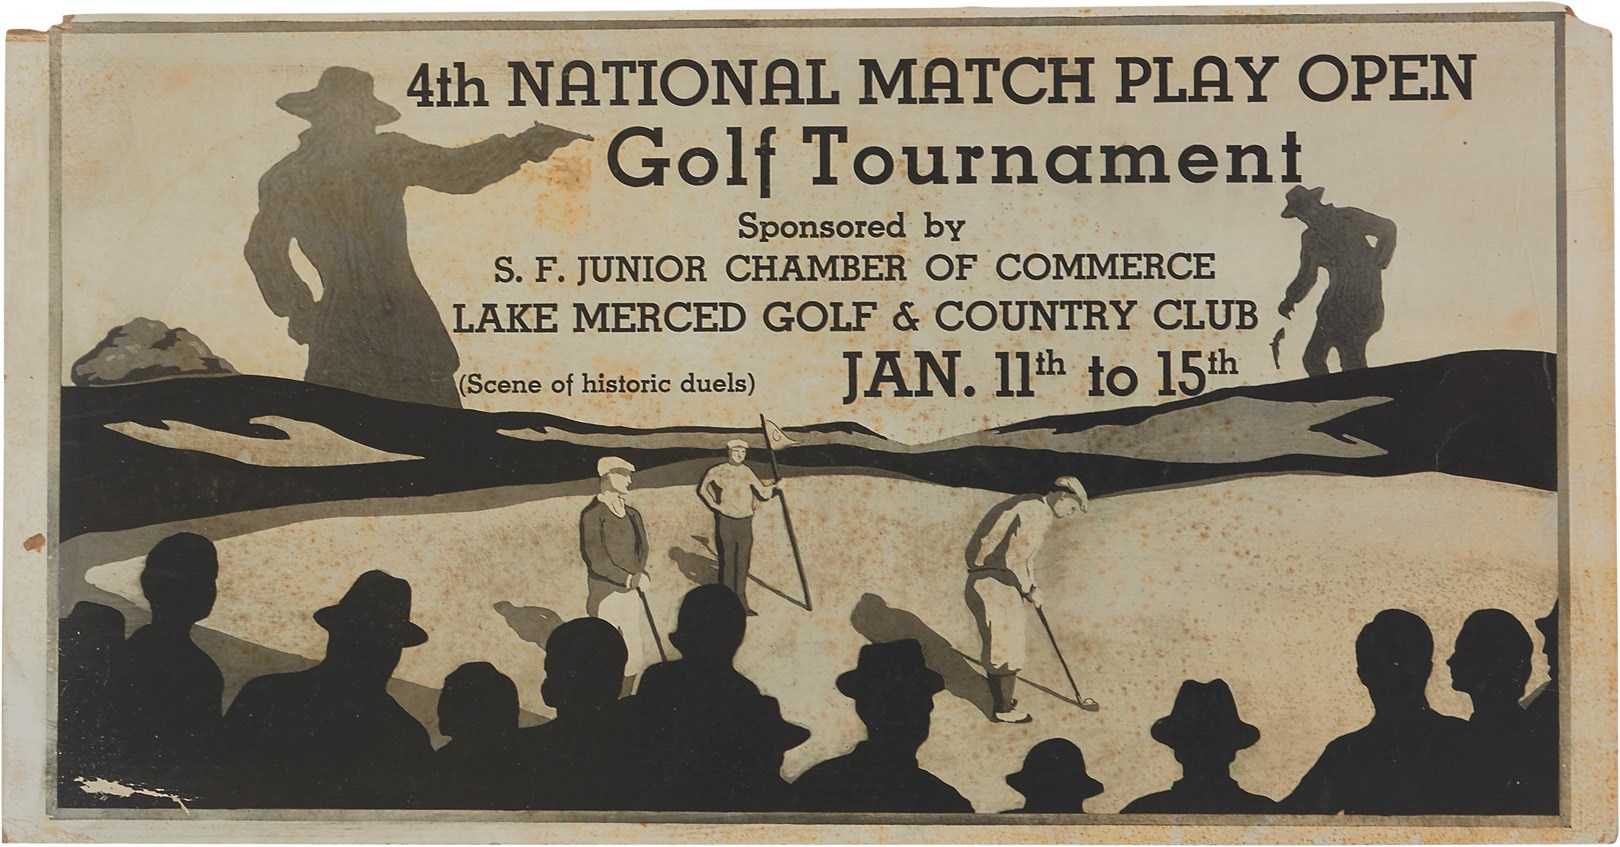 Olympics and All Sports - 4th National Match Play Open Golf Championship Poster